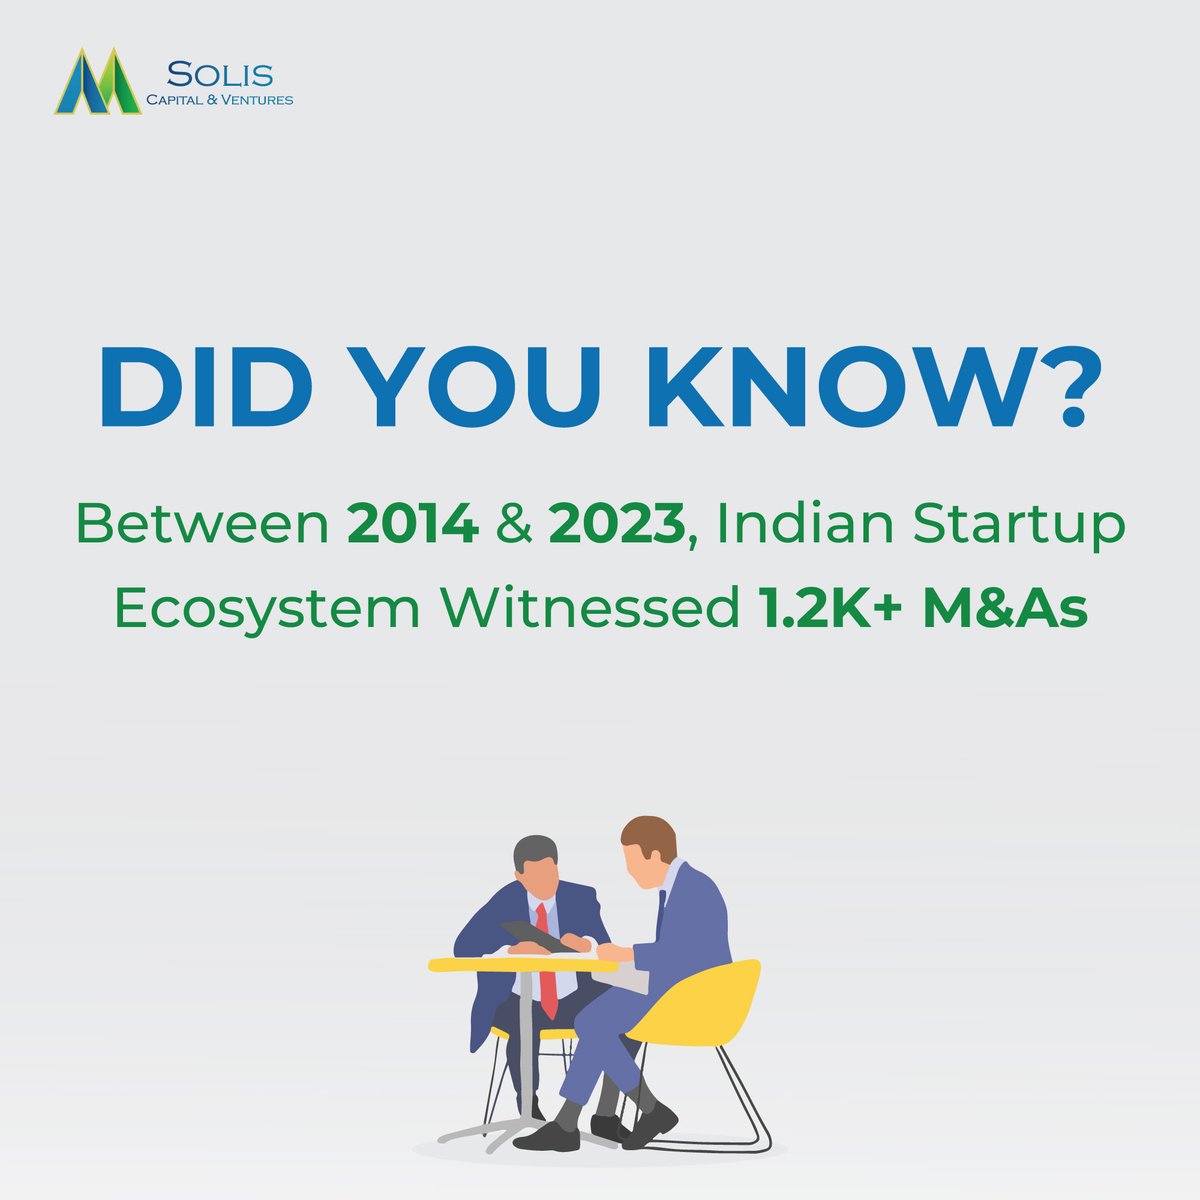 If your #company needs the right kind of guidance to through M&A, then contact #SolisCapitalVentures.

#startupindia #unicorndreams #startupgrind #startupstories #startupadvice #startupgrind #startupcompany #startupnews